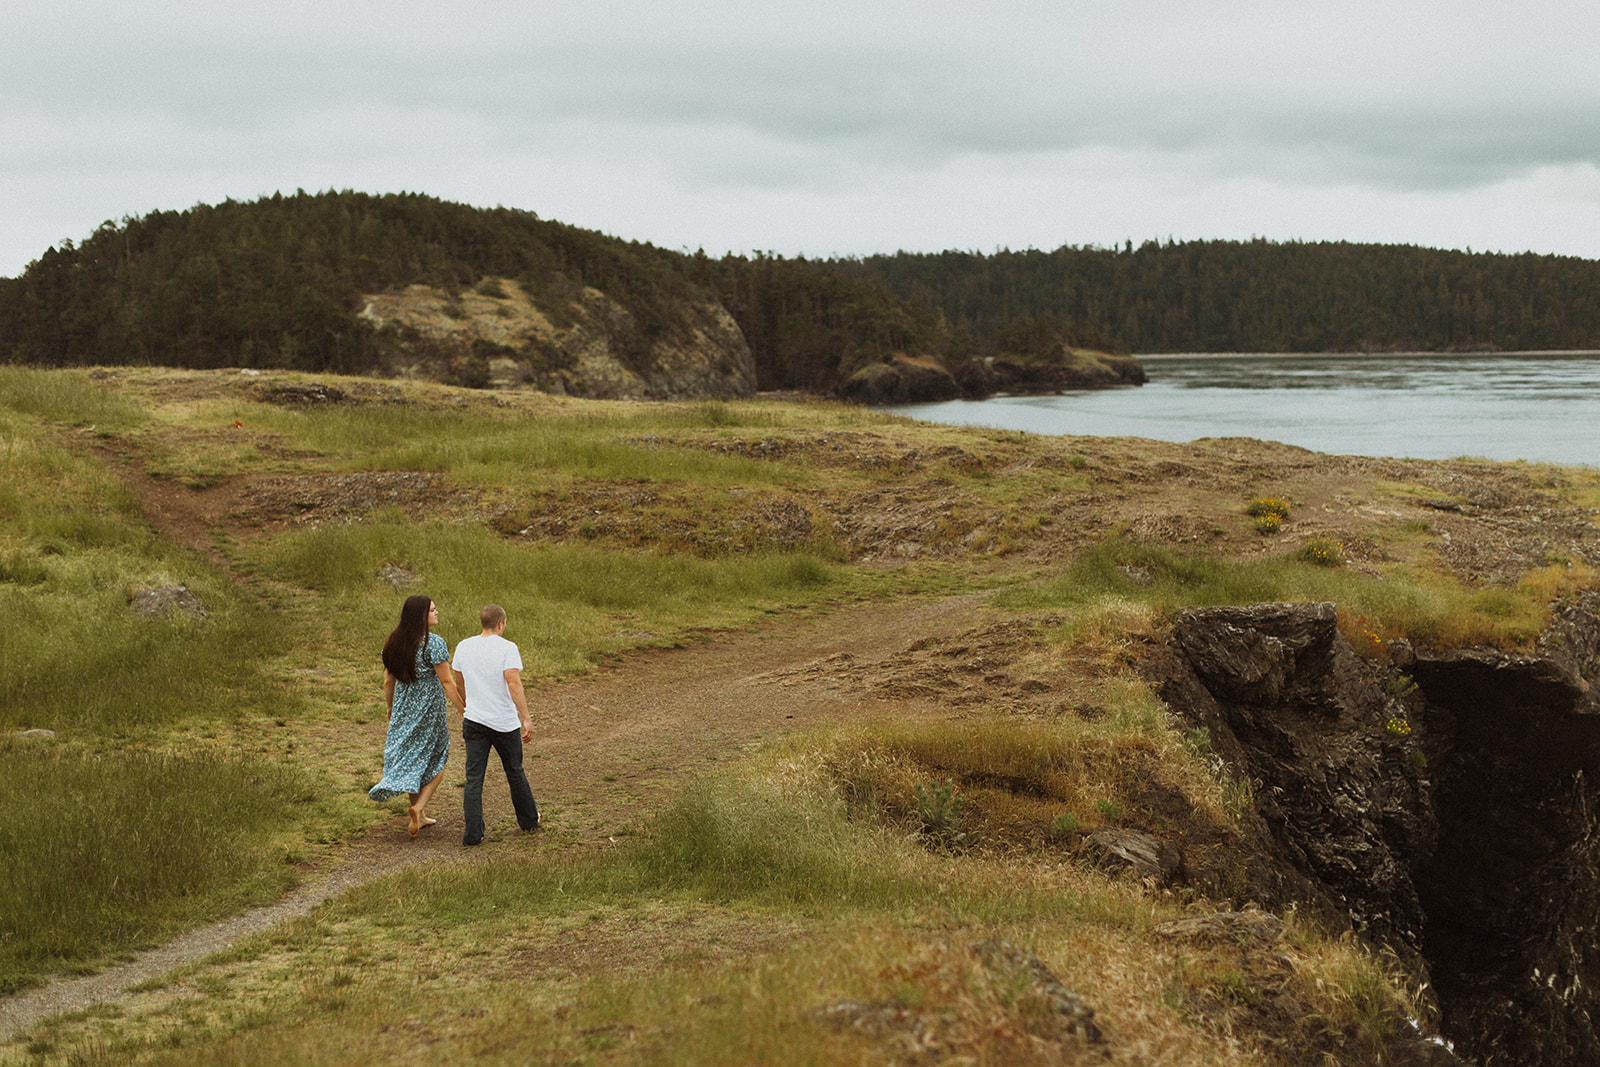 This mystic Washington elopement location, Deception Pass State Park, will make you feel like you are on the Cliffs of Moher in Ireland